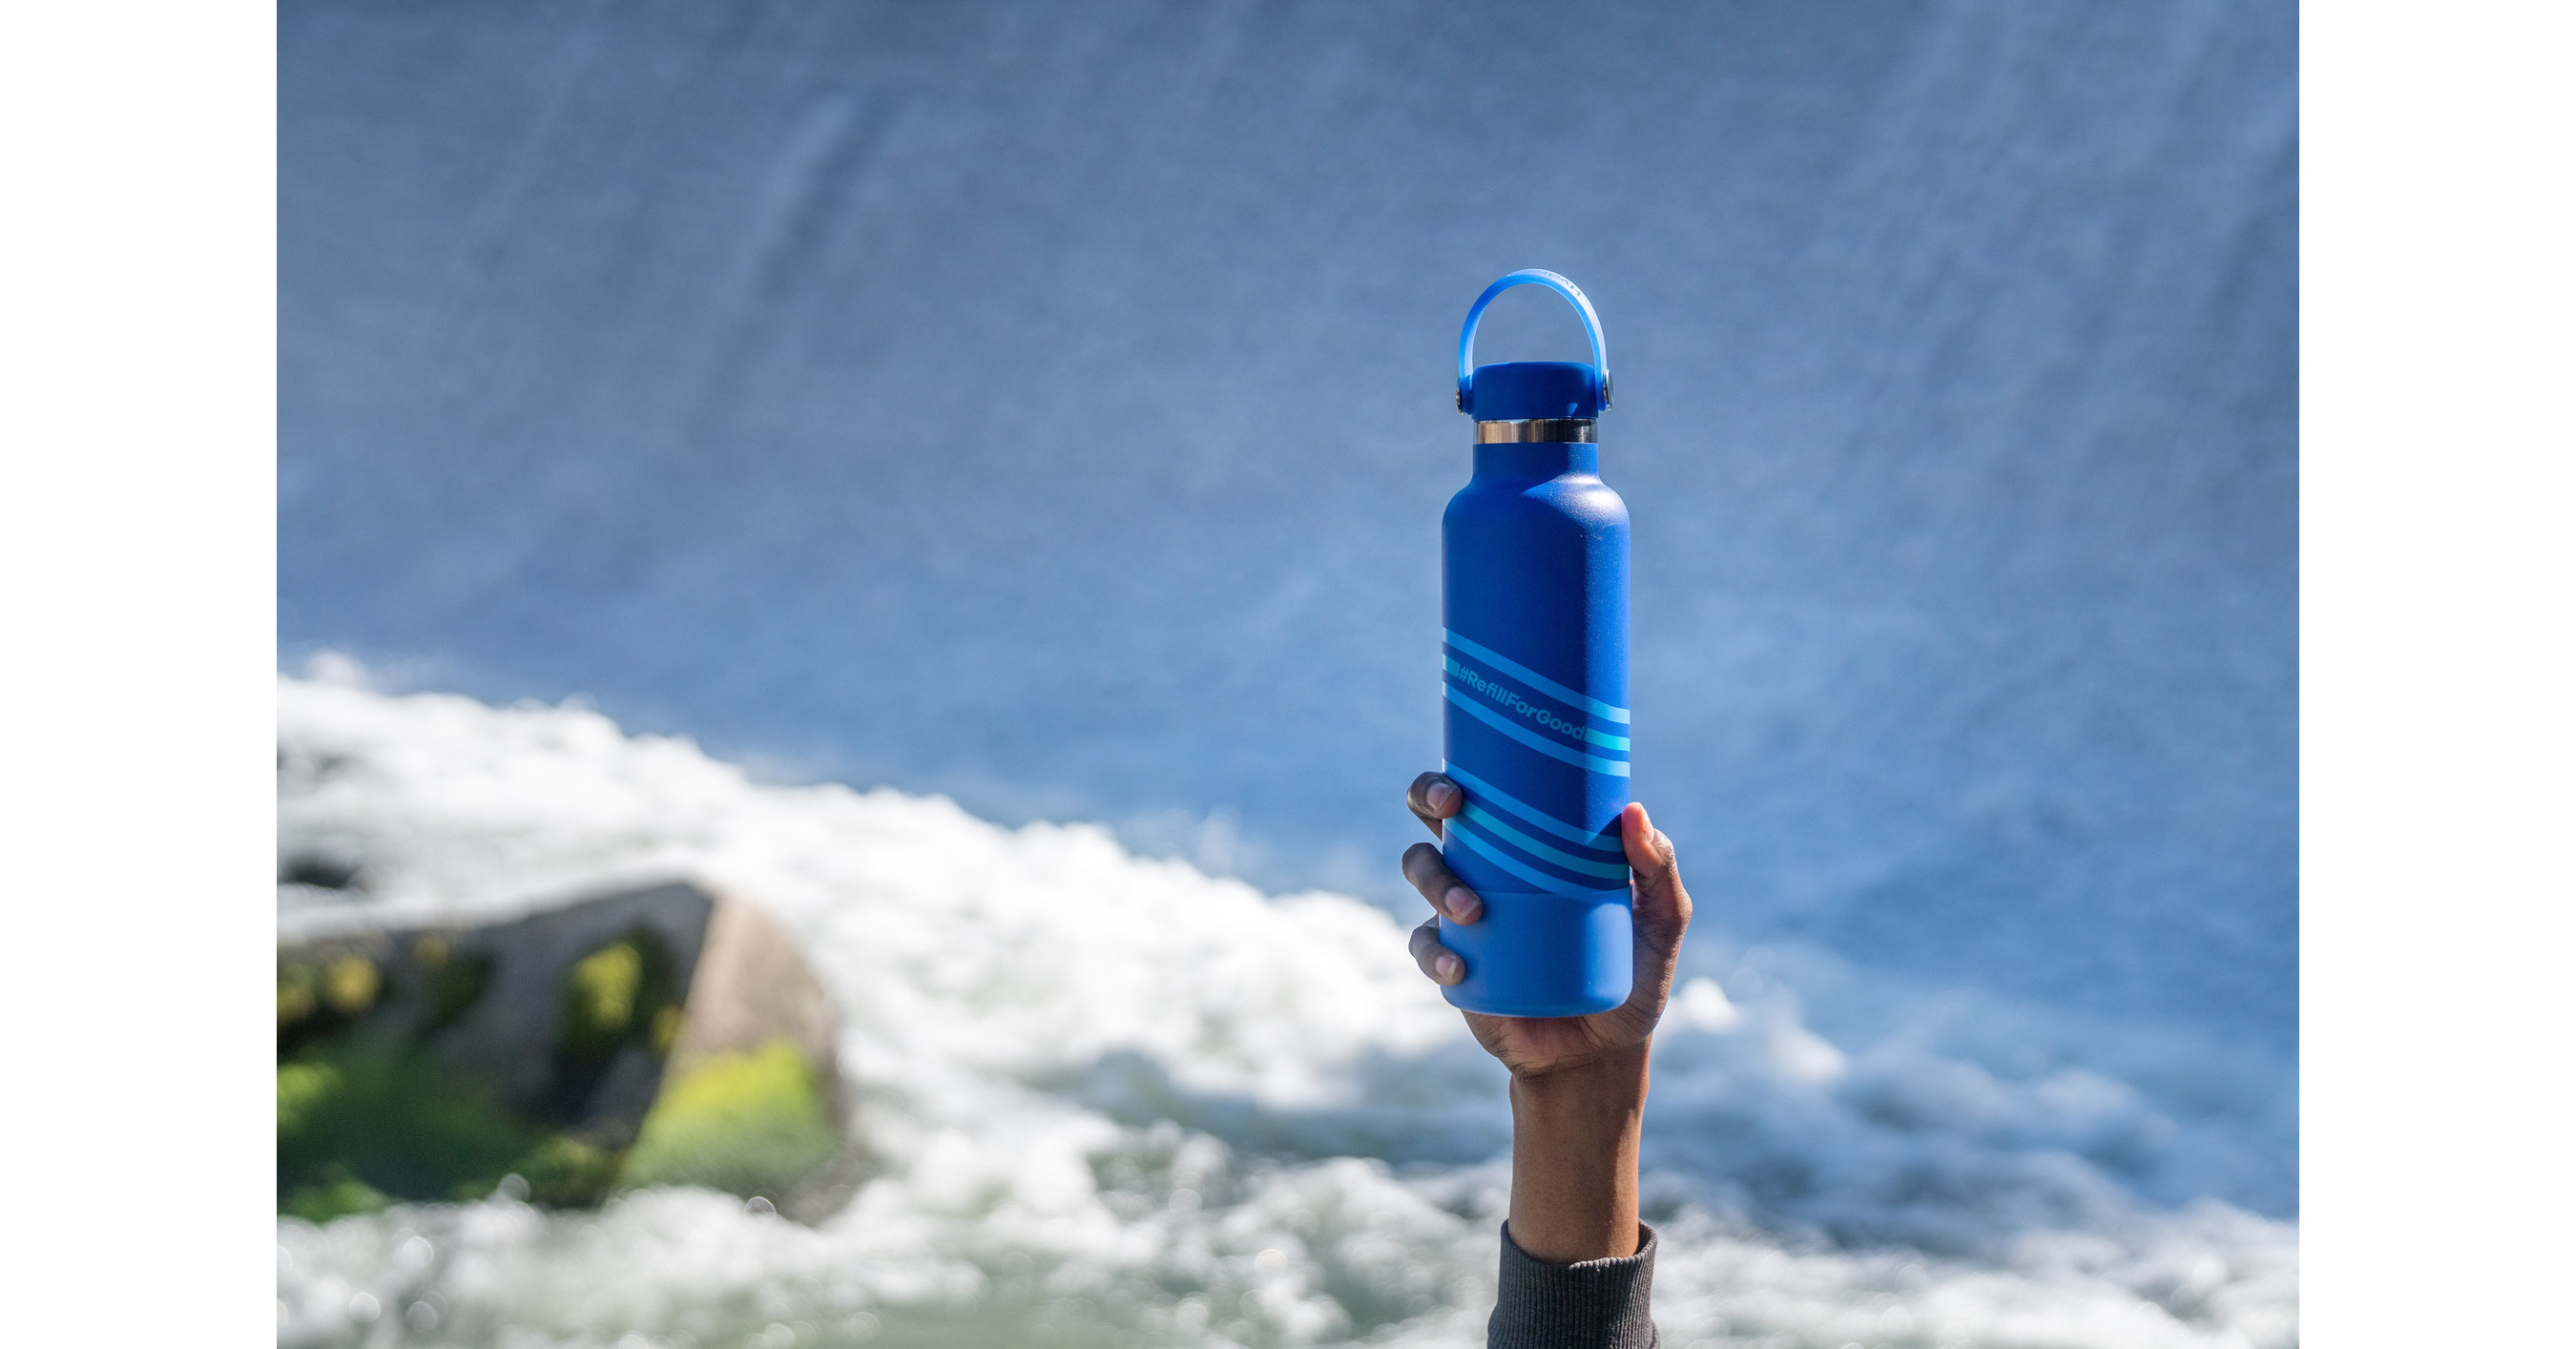 Hydro Flask Singapore - Take your #HydroFlask with you on an adventure. Our Bottle  Sling stays light when you need hands-free hydration.